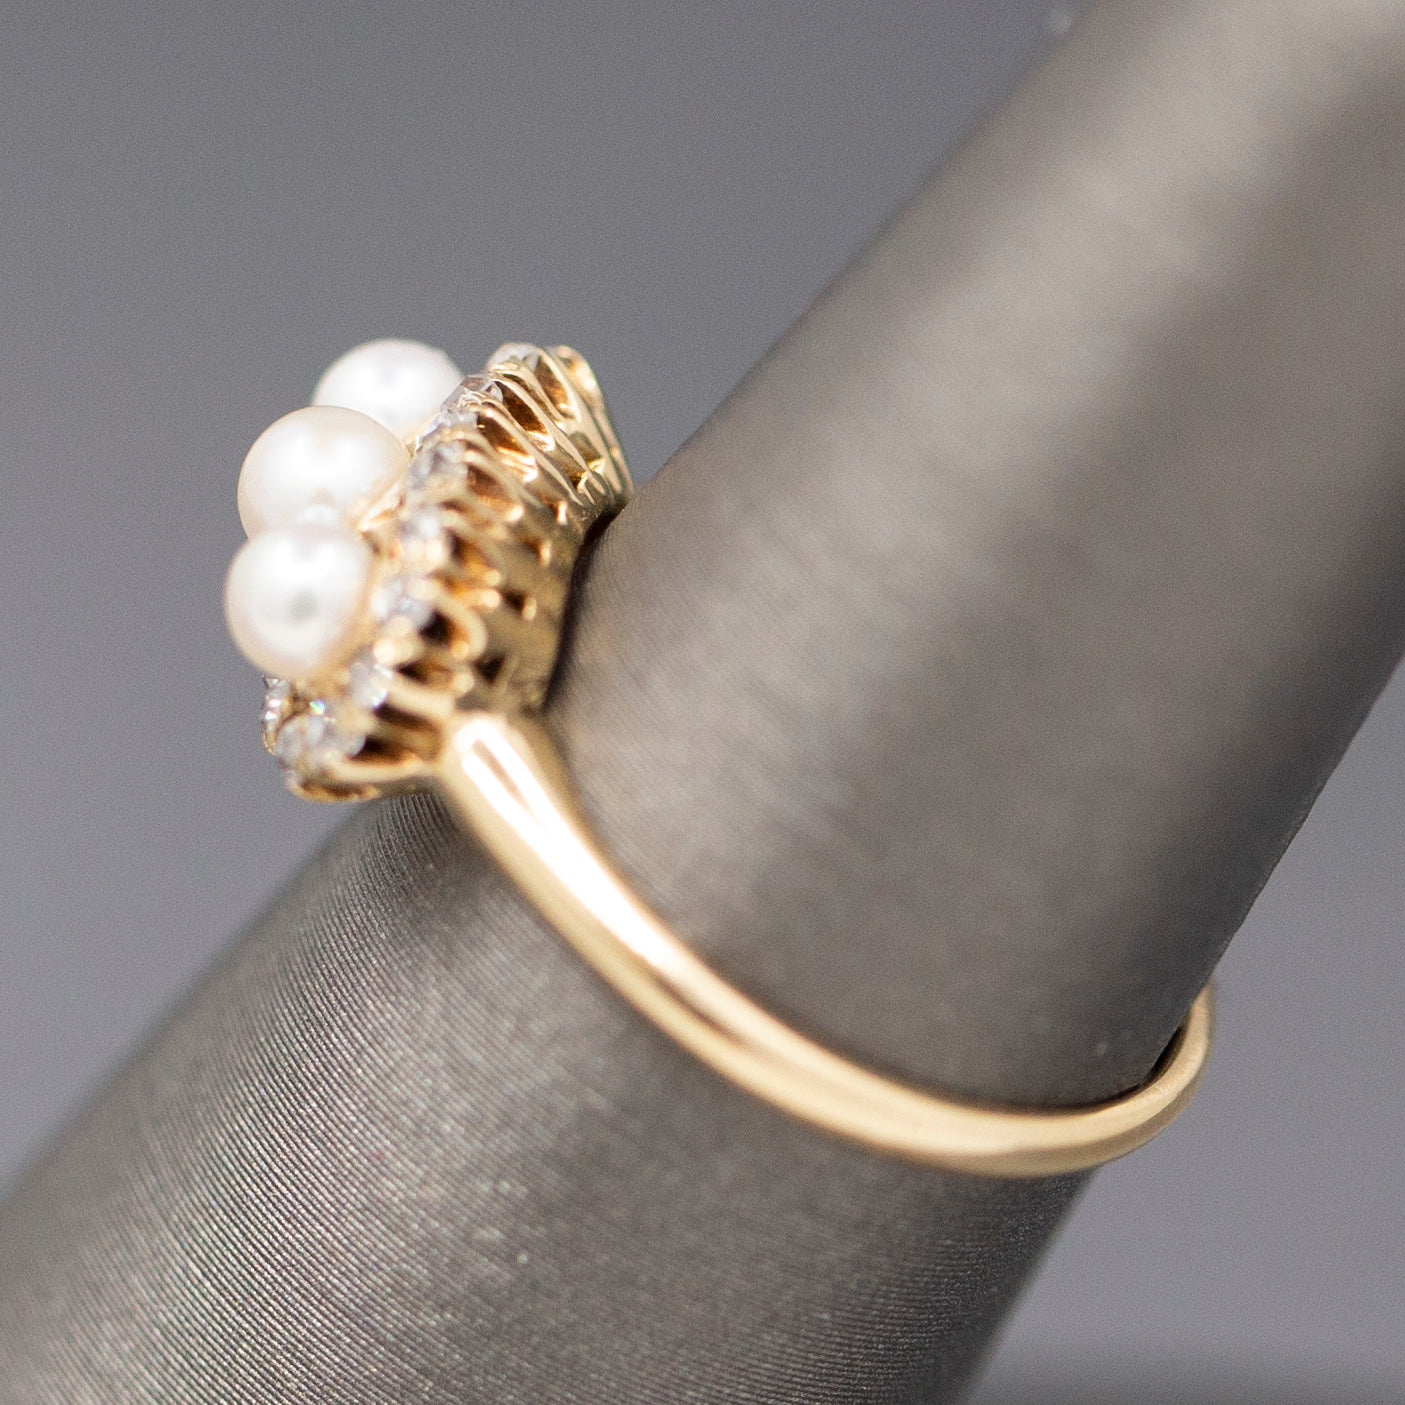 Antique Edwardian Three Stone Pearl Ring with Old Mine Cut Diamond Halo in 14k Yellow Gold